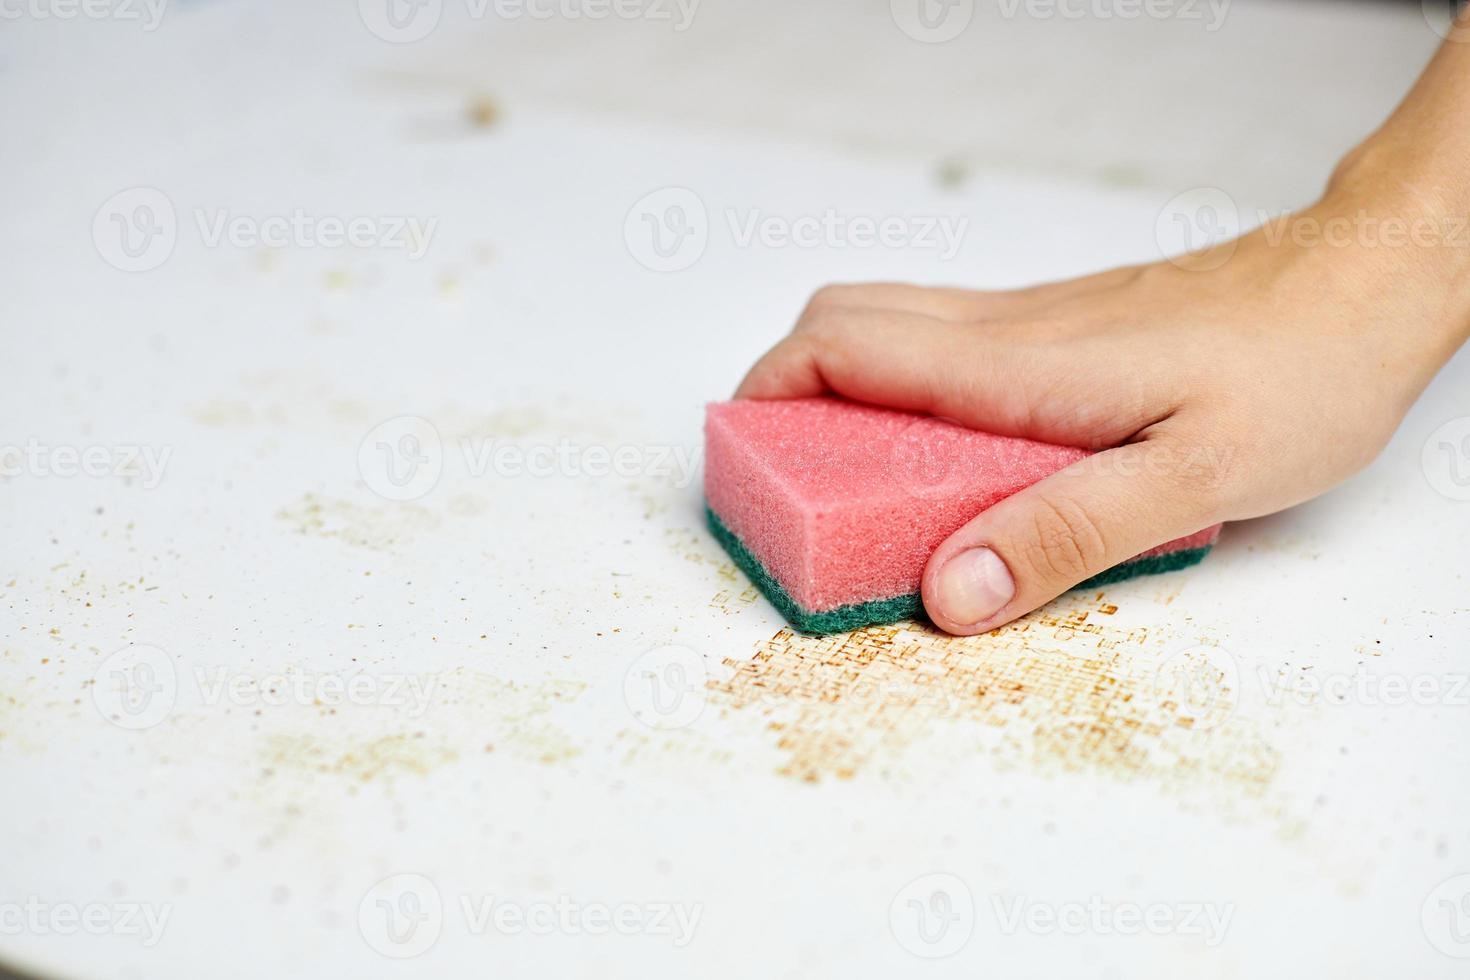 Sponge in woman hand removes dirt, bread crumbs and leftovers. Cleaning kitchen table. Household chores photo